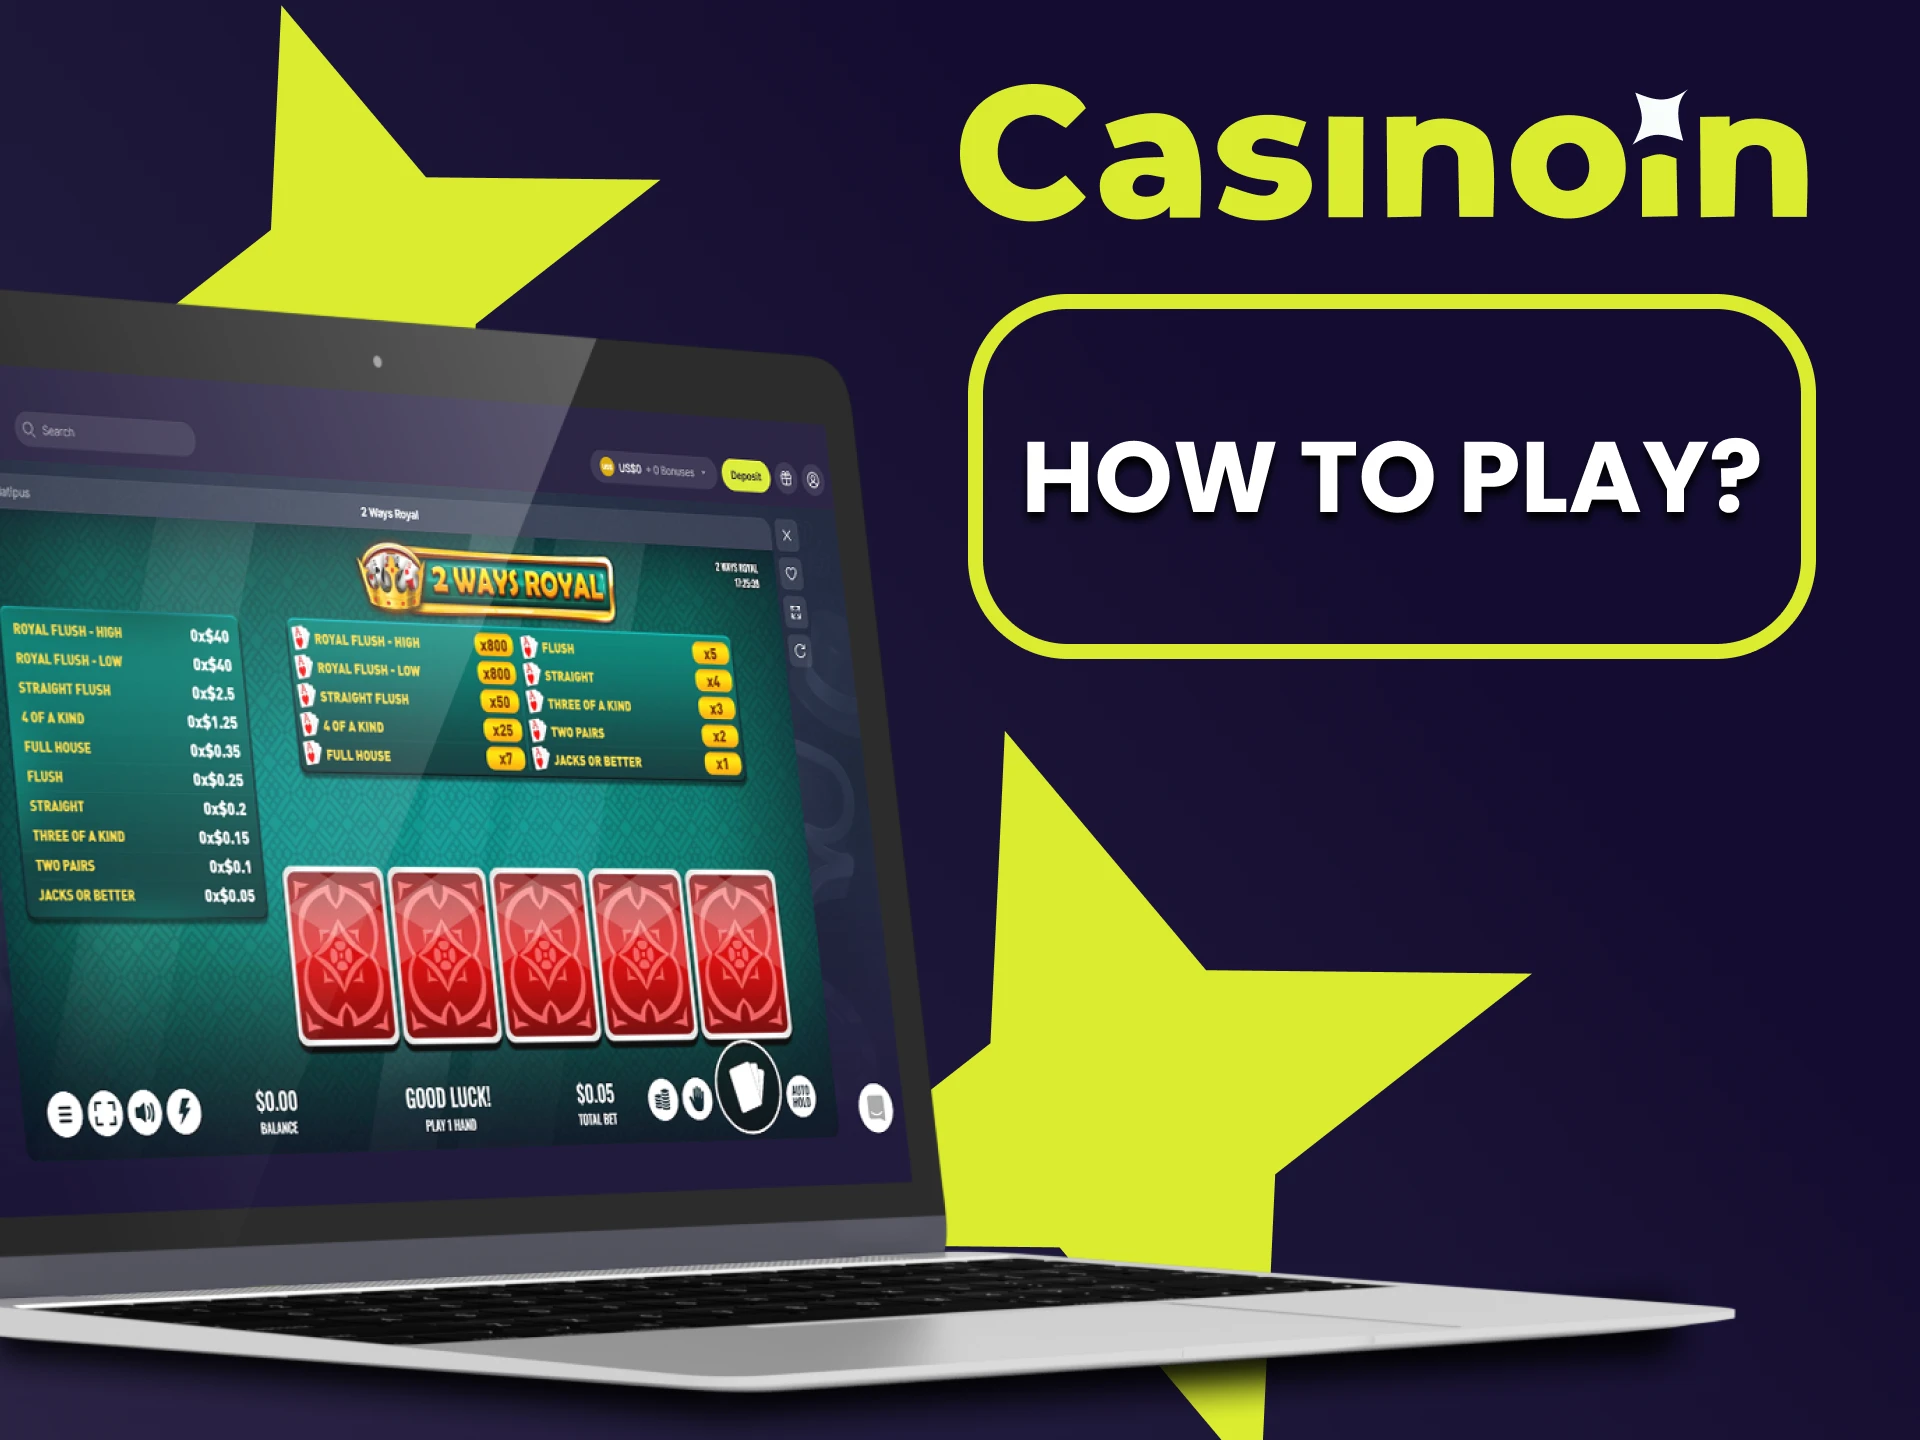 Find out how to start playing at casinos at Casinoin.